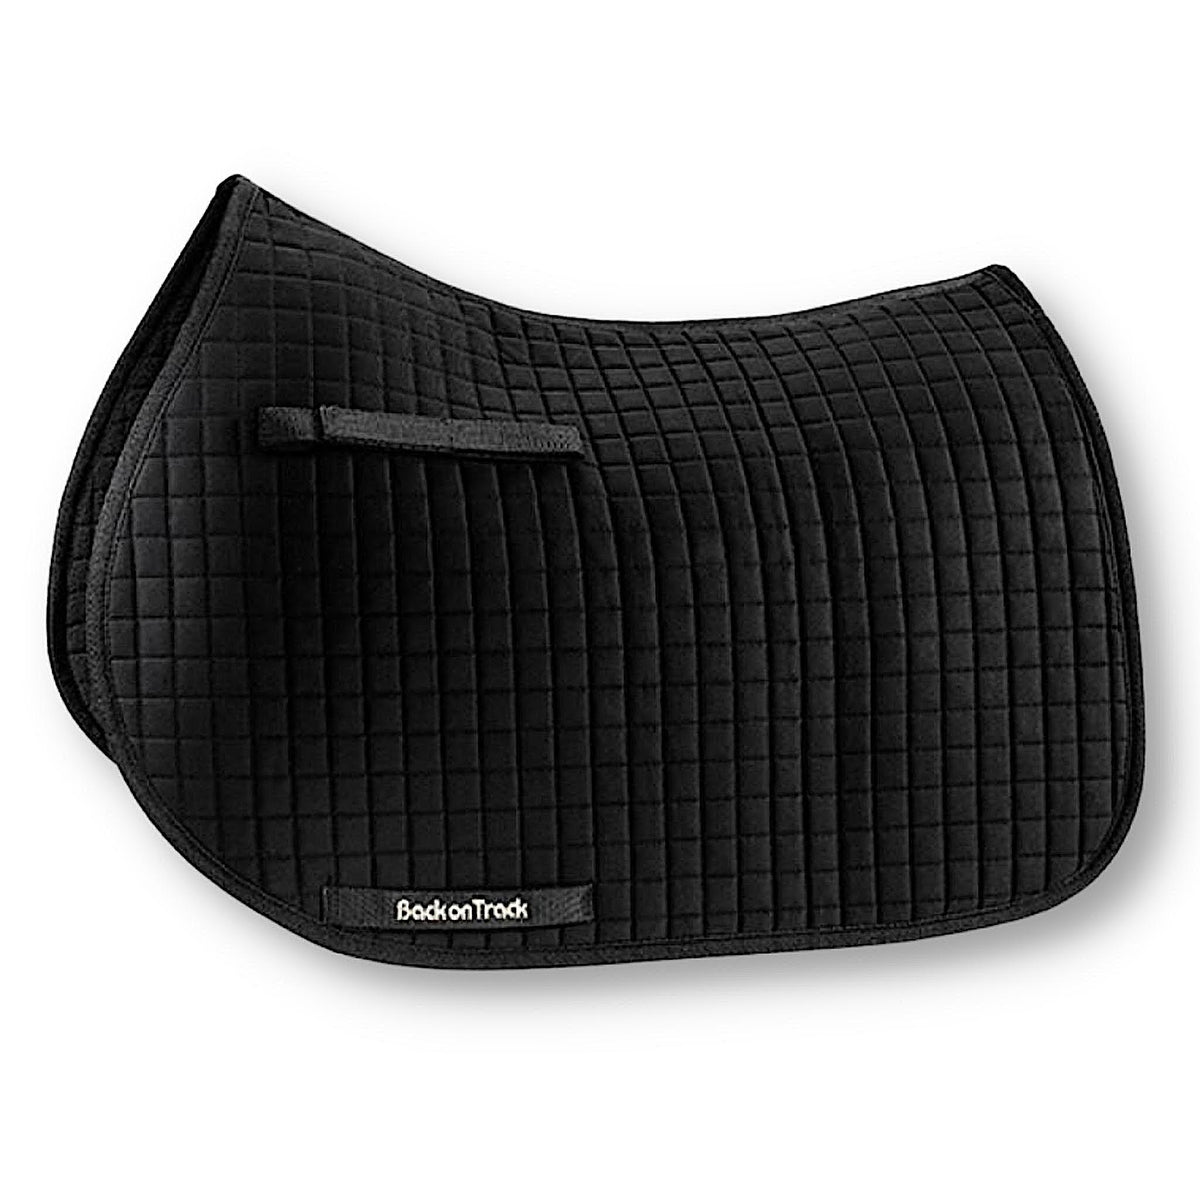 Black saddle pad with keepers in all purpose shape.